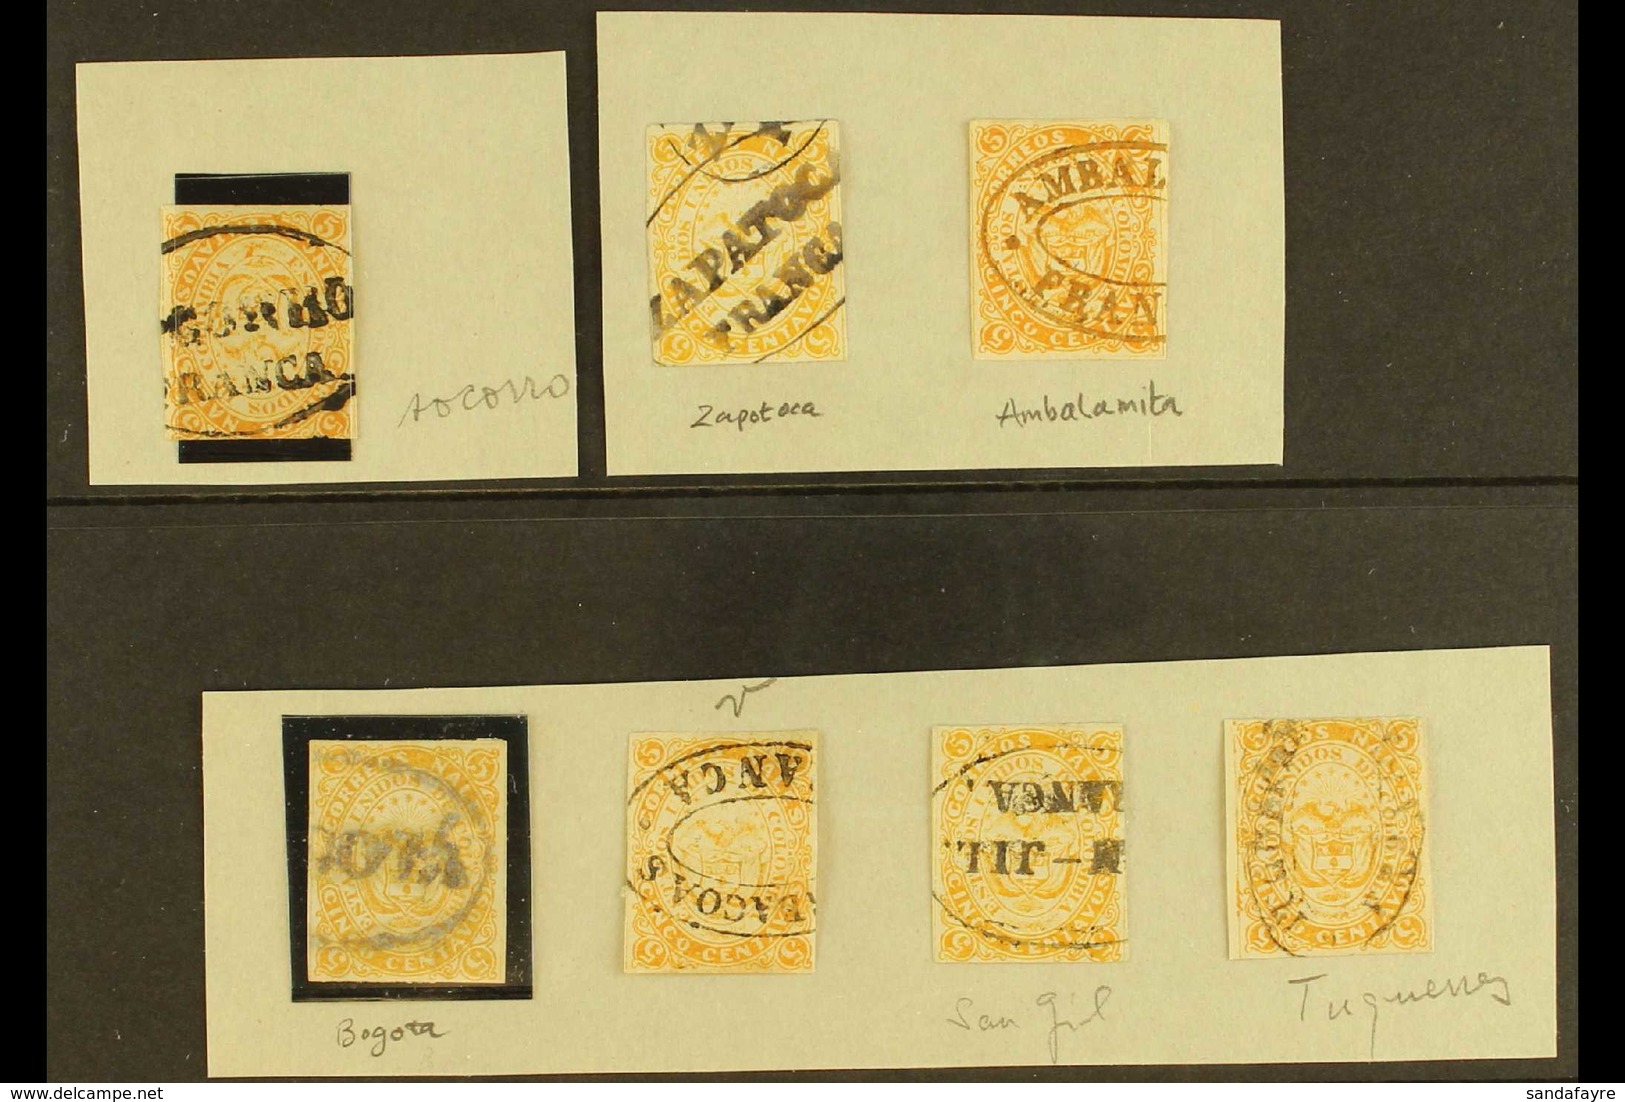 1868 FIVE CENTS ISSUE - POSTMARK SELECTION A Used Collection Of The 1868 5c Orange, Scott 53, SG 51, With Several Differ - Colombia